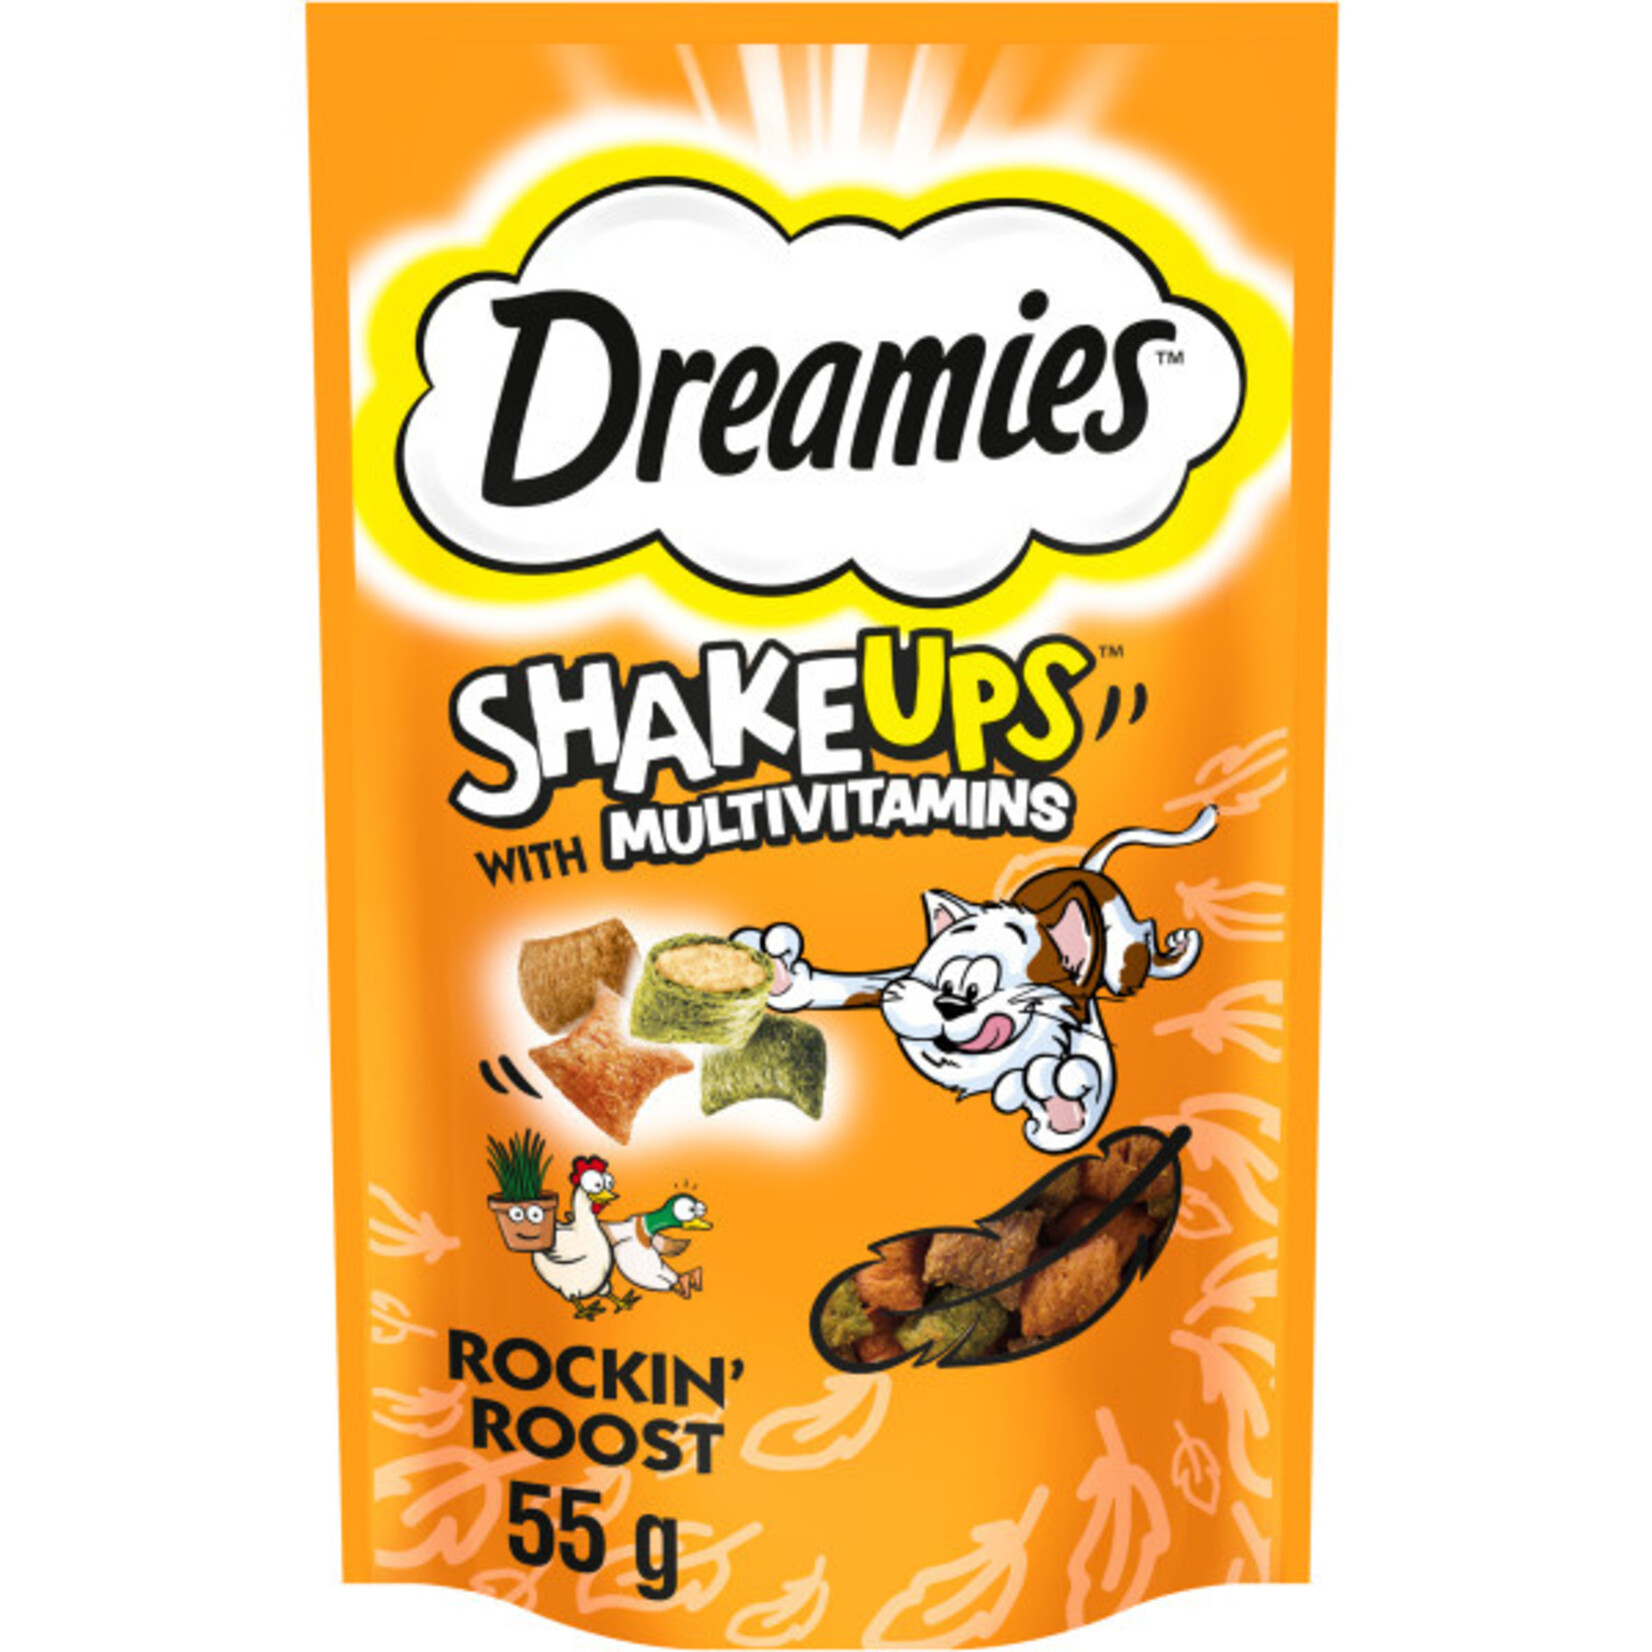 Dreamies Shakeups  with Multivitamins Rockin Roost Cat Treats, 55g